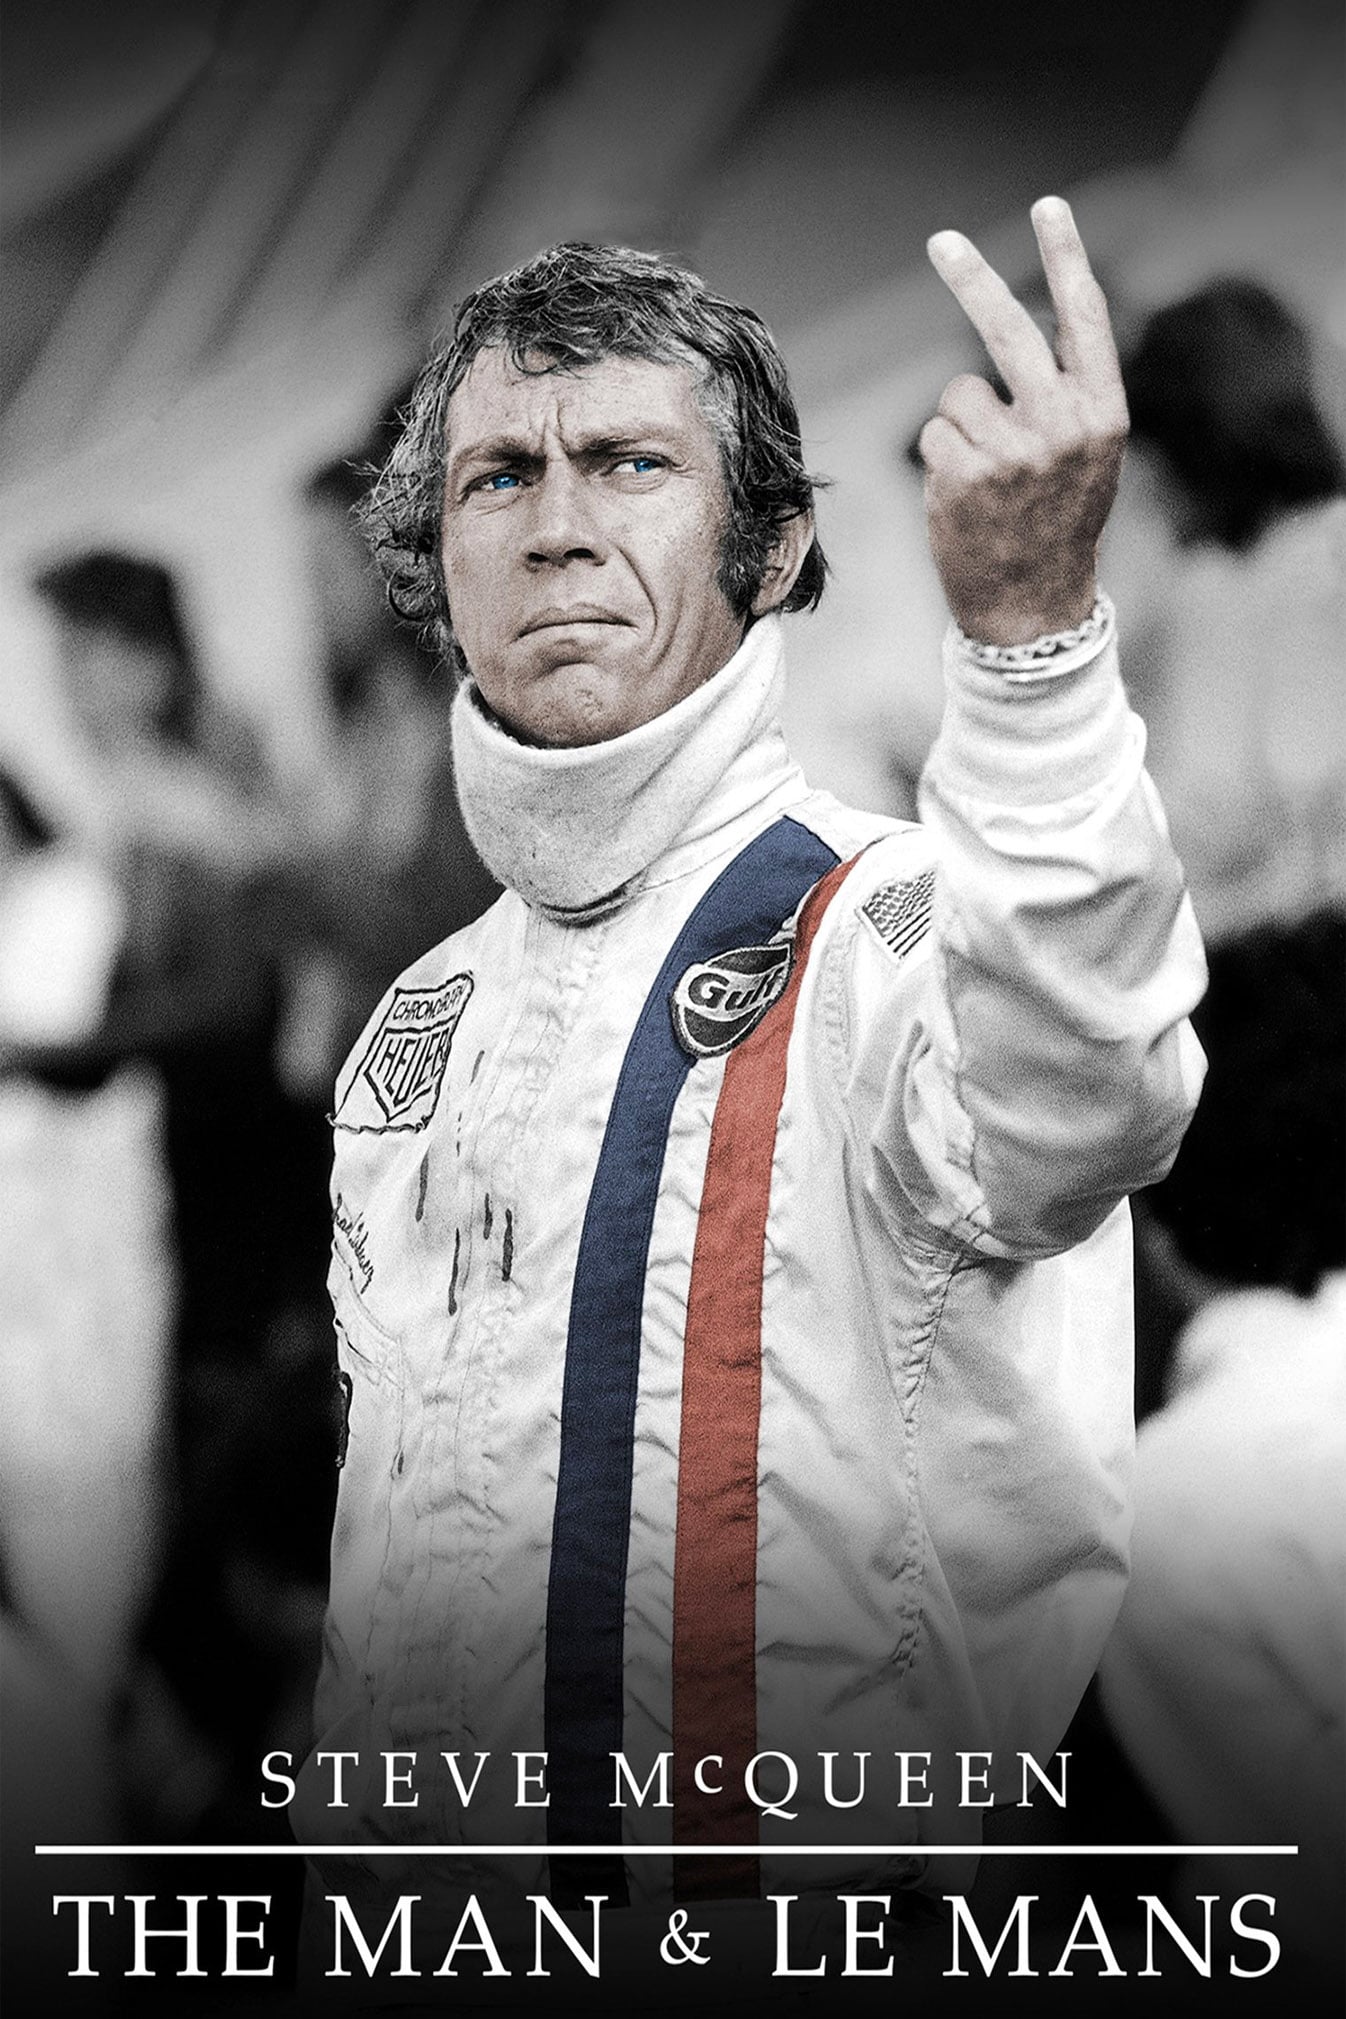 STEVE MCQUEEN: THE MAN AND LE MANS